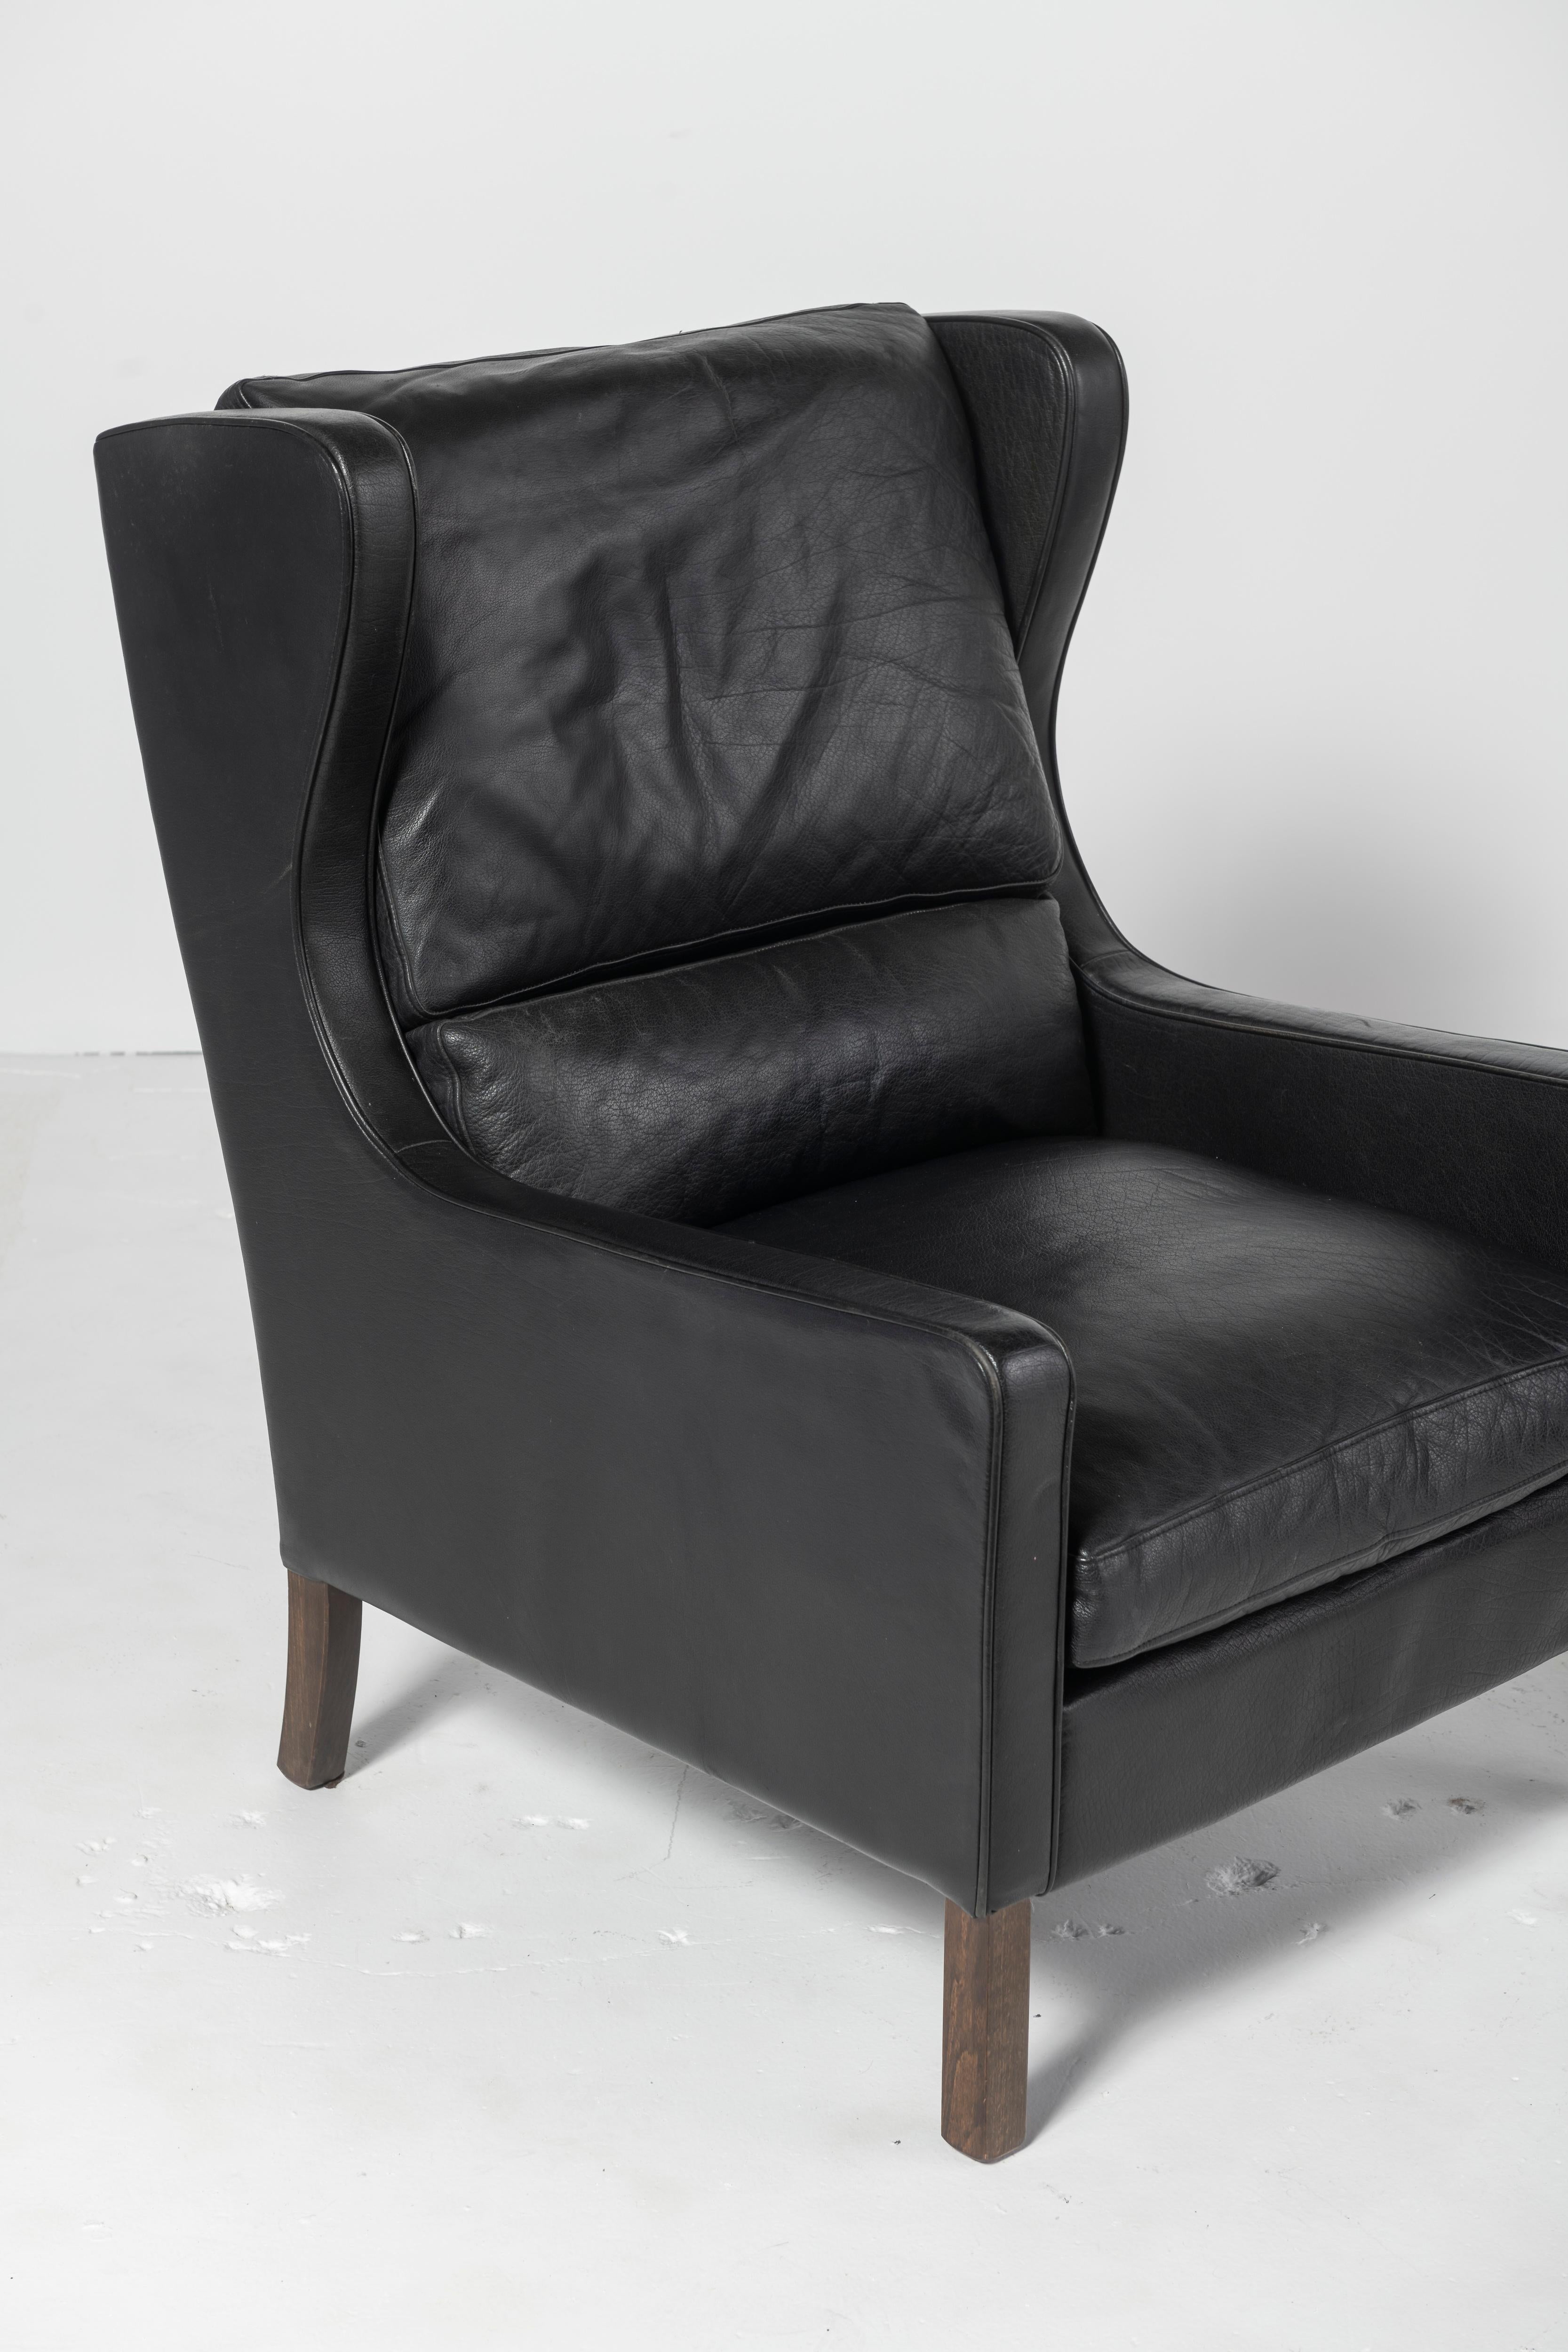 Two Mid-Century Danish Modern wingback leather chairs in black attributed to Børge Mogensen. Original leather on both chairs which are not only comfortable but have a beautifully lustrous patina.